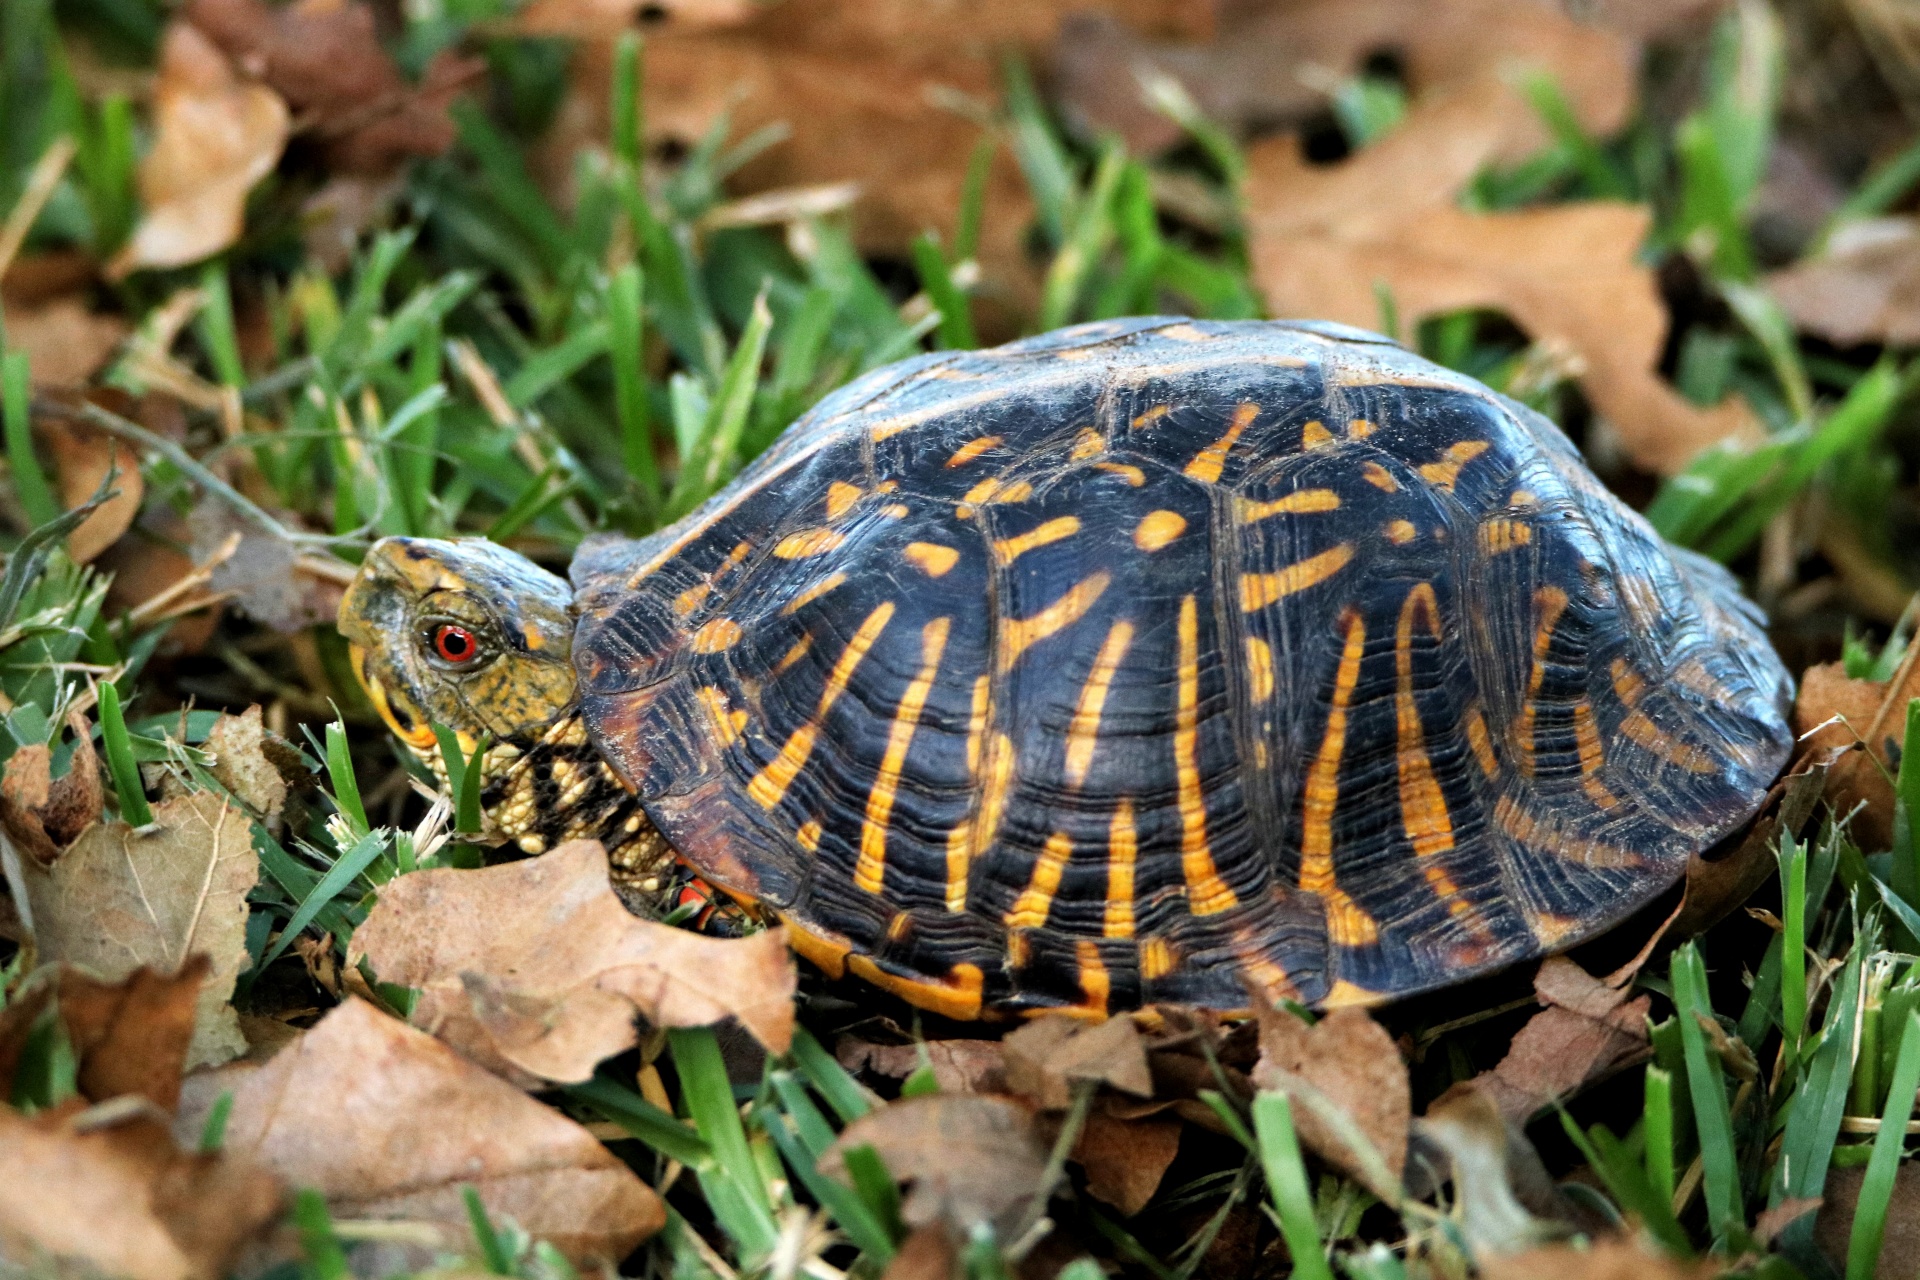 Close-up of an ornate box turtle as he slowly walks through the grass and fallen leaves in early spring.